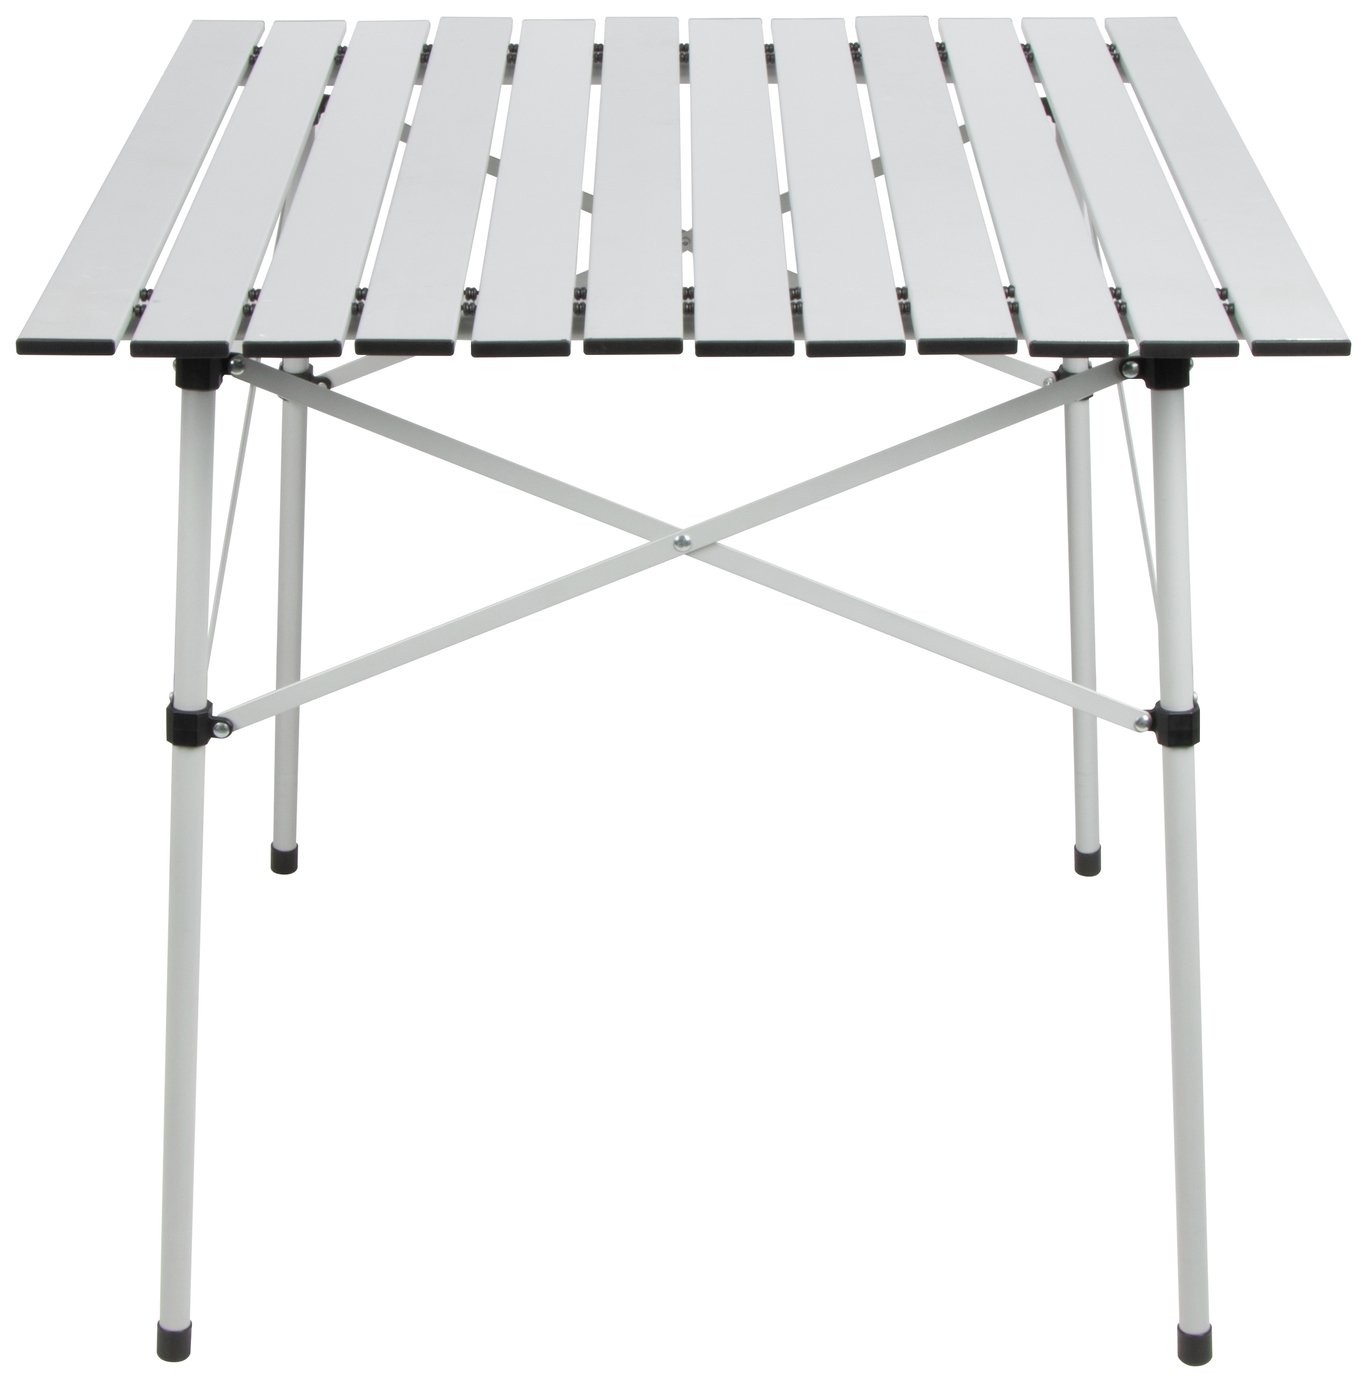 Aluminium Folding Camping Table with Slatted Top Reviews